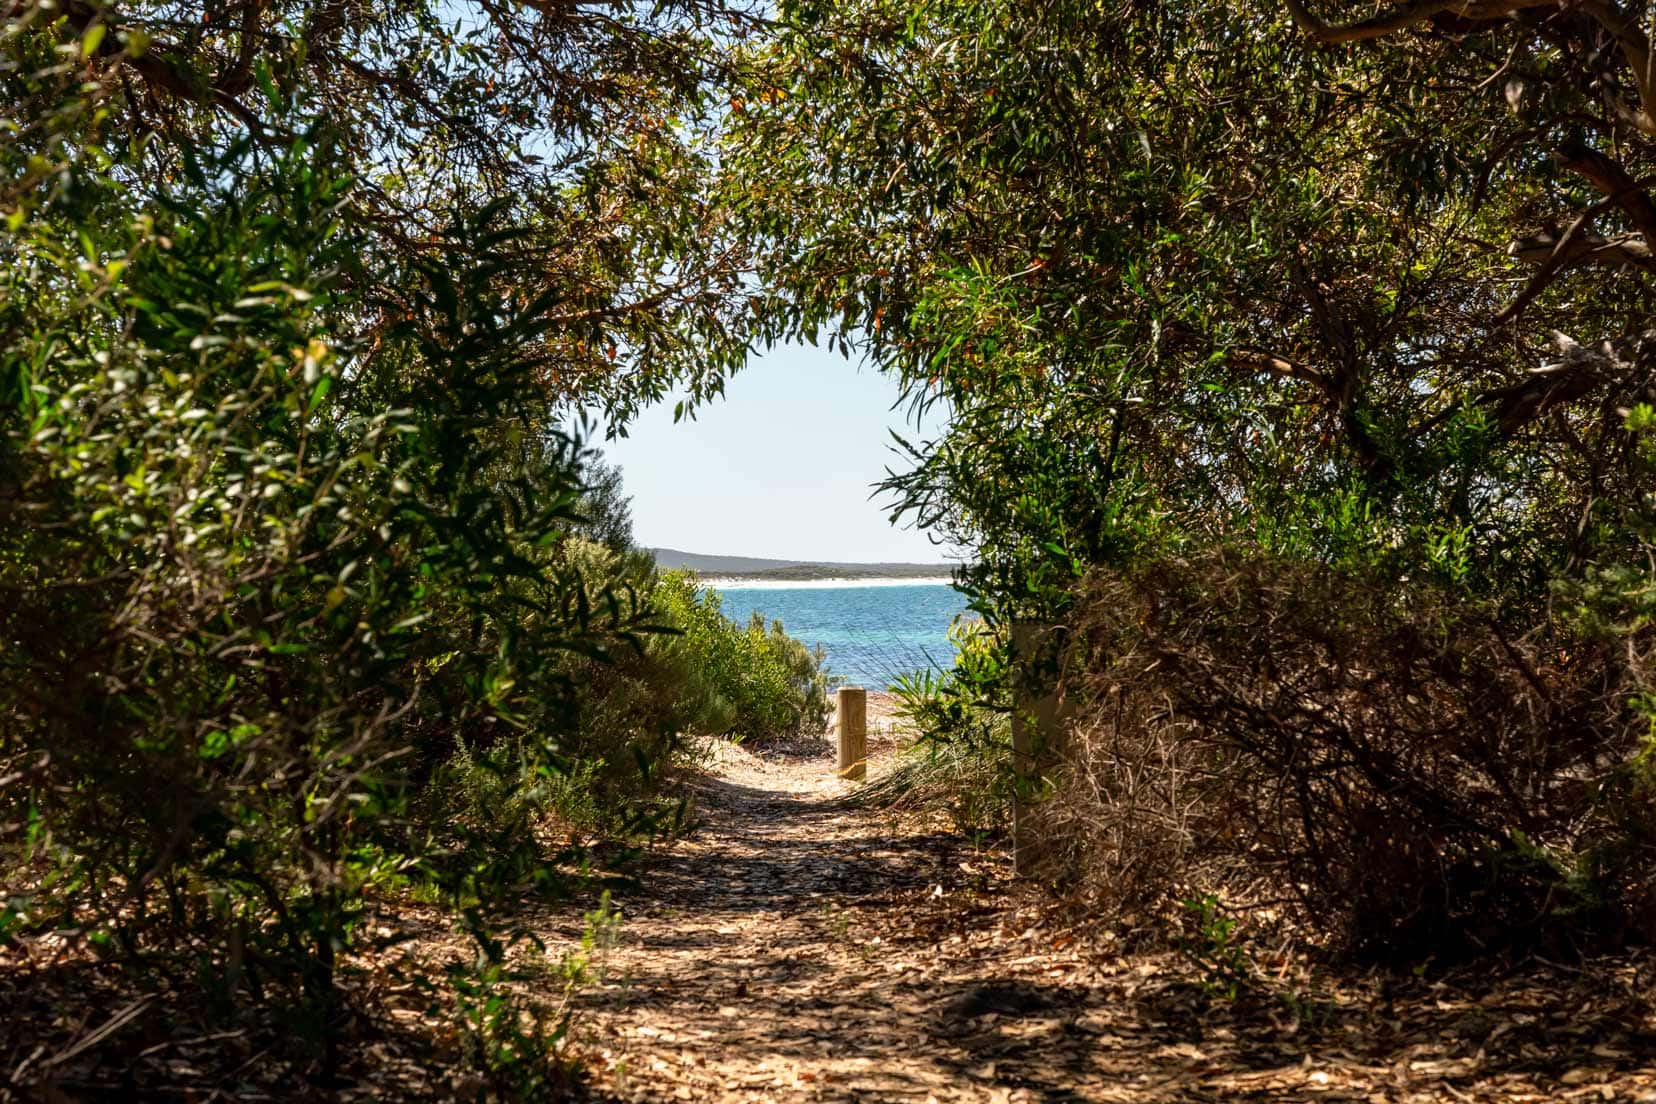 View of the beach from the Rossiter Bay Bird Sanctuary - trees framing a glimpse of the ocean and beach along a sandy path